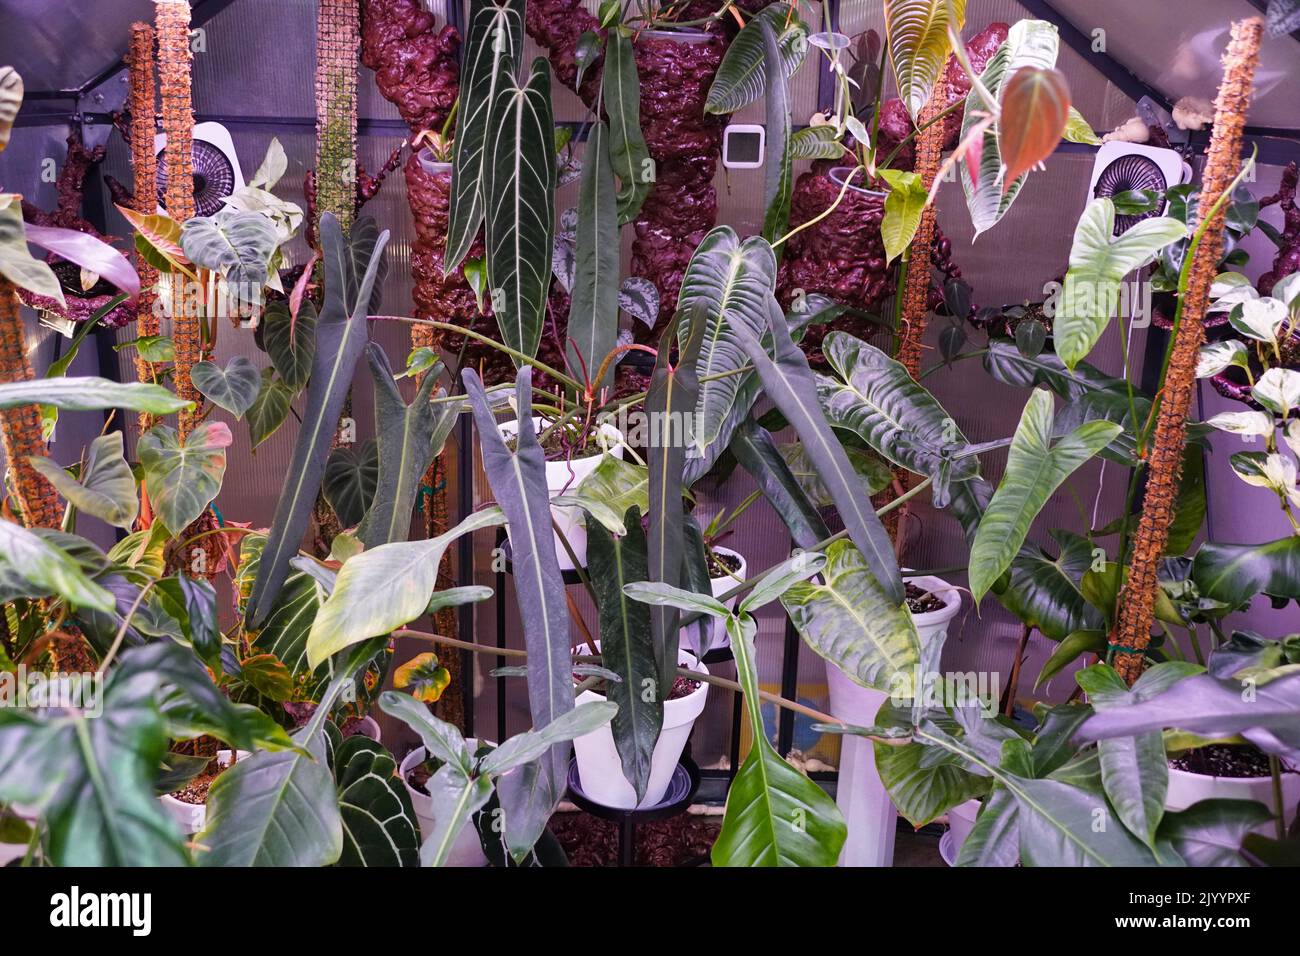 A greenhouse filled with rare Philodendron, Monstera and Anthurium plants Stock Photo